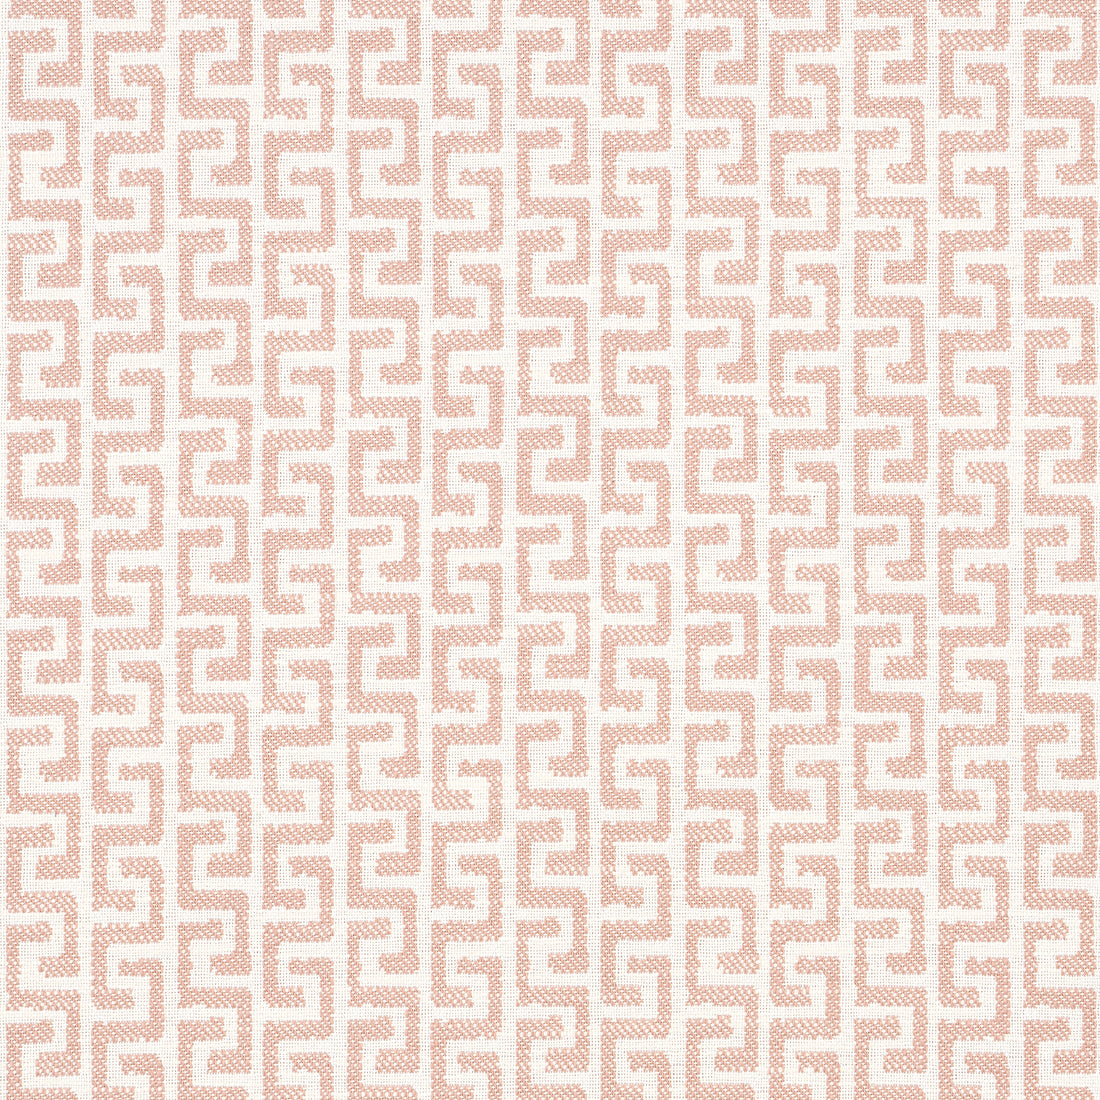 Merritt fabric in blush color - pattern number W74250 - by Thibaut in the Passage collection